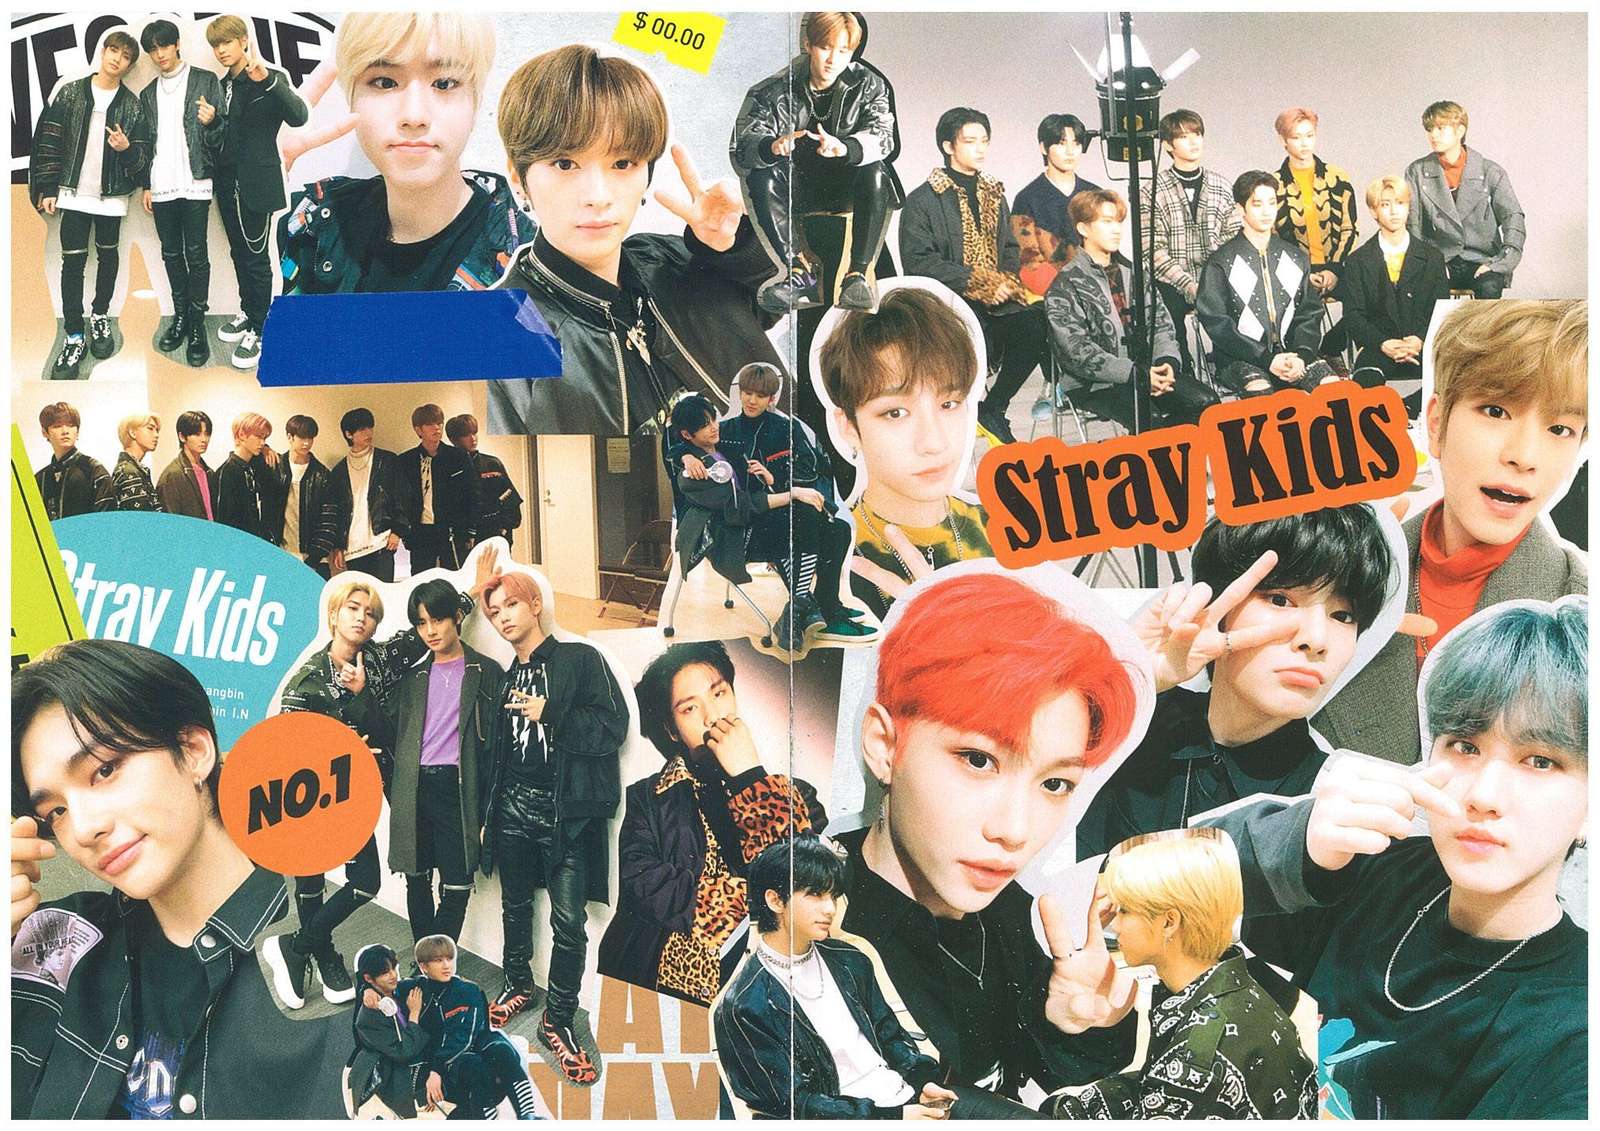 More SKZ puzzle online from photo